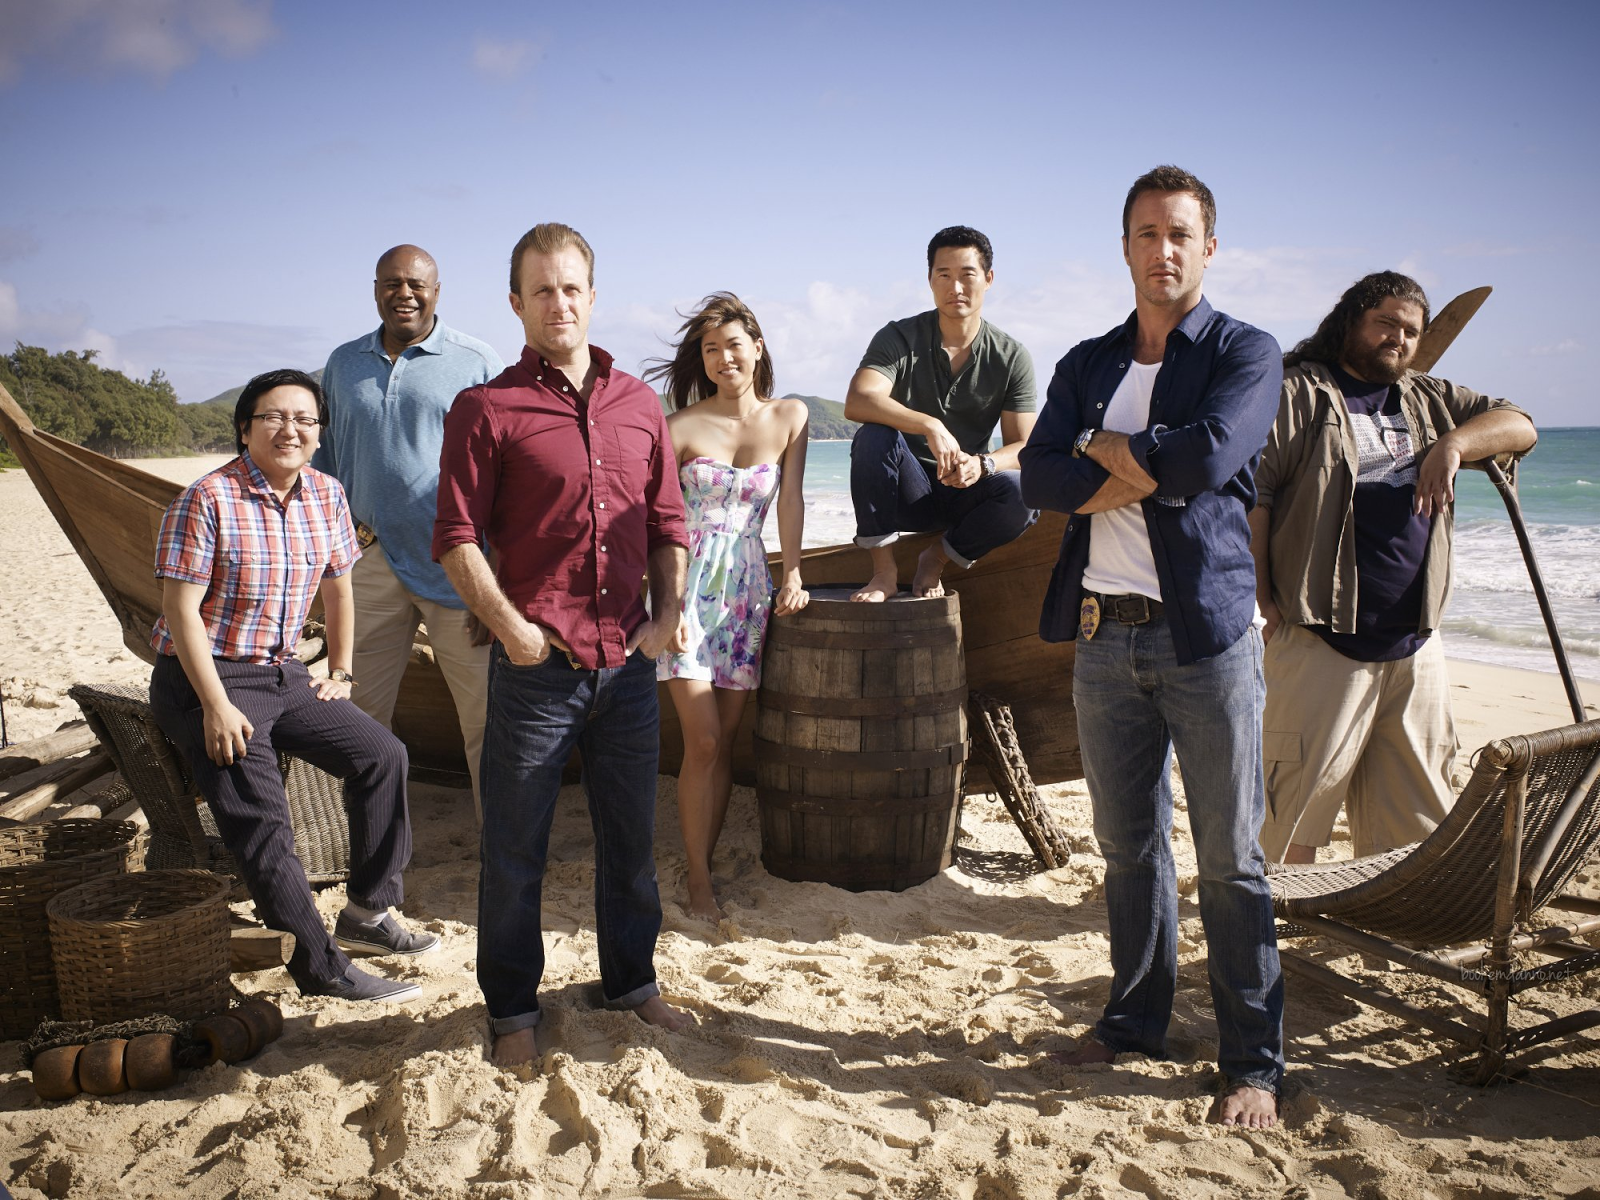 hawaii 5-0 saison 3 complete torrent french